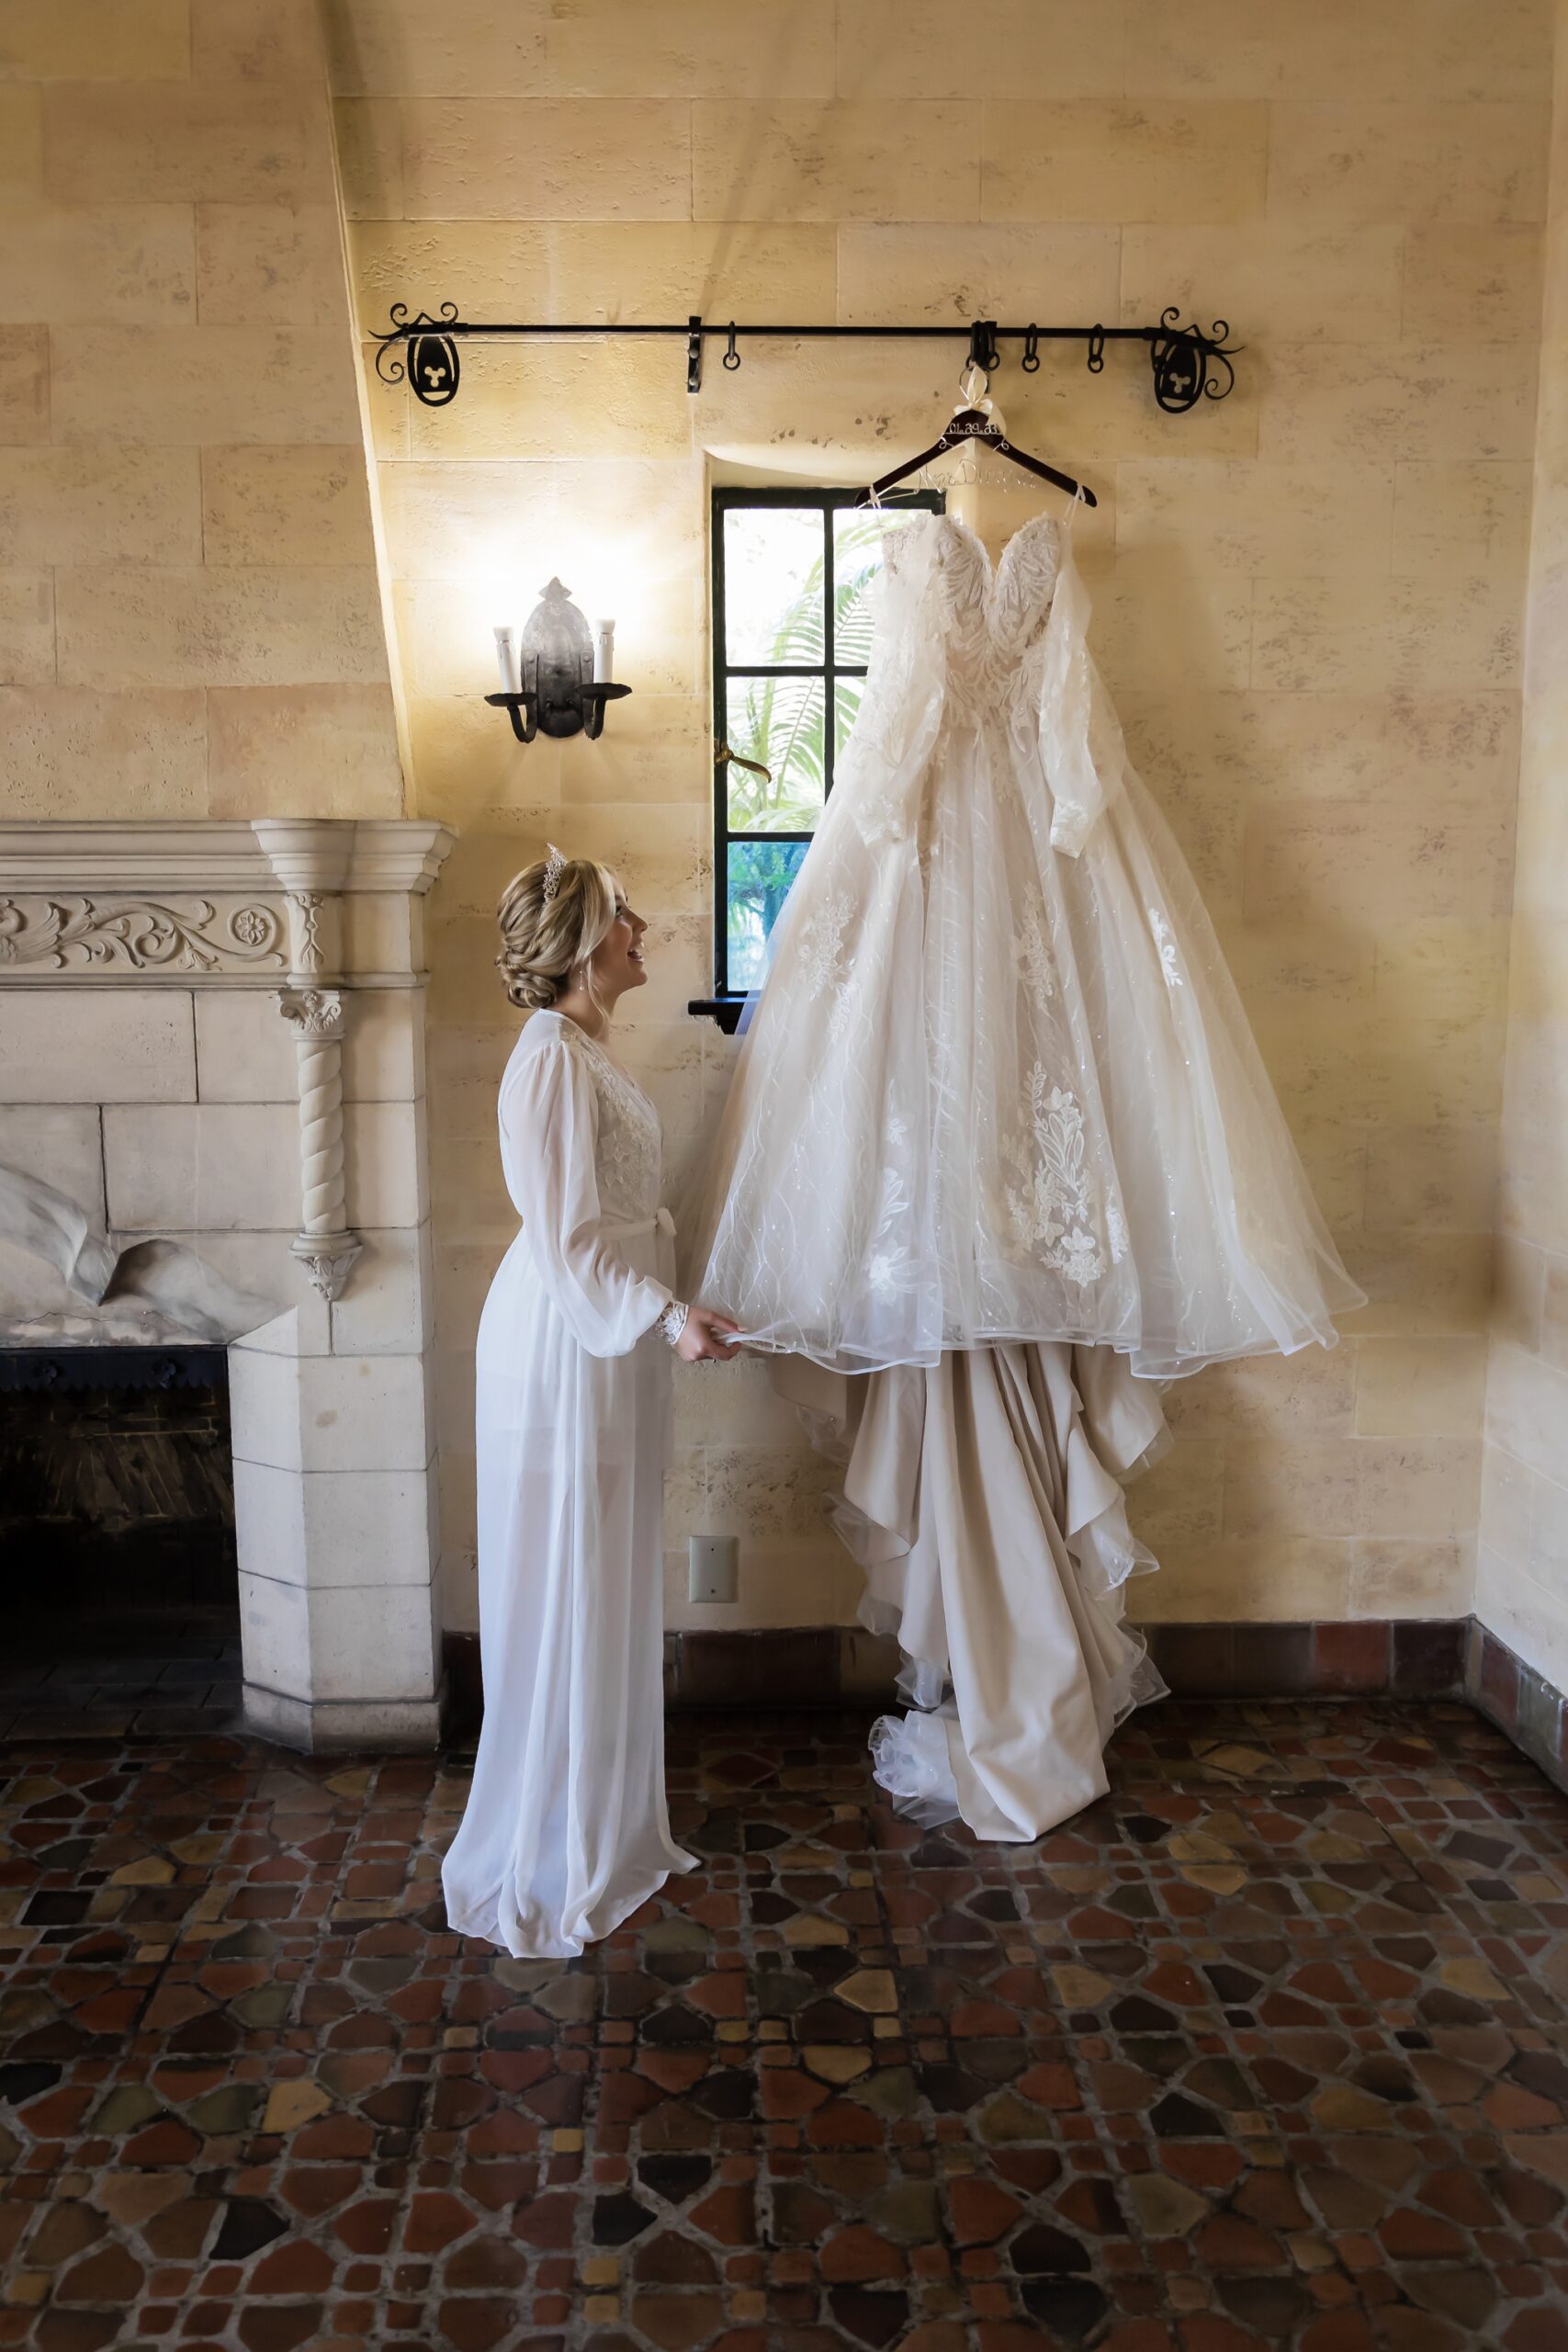 Bride looking at her beautiful dress hanging in the window at the Powel Crosley Estate